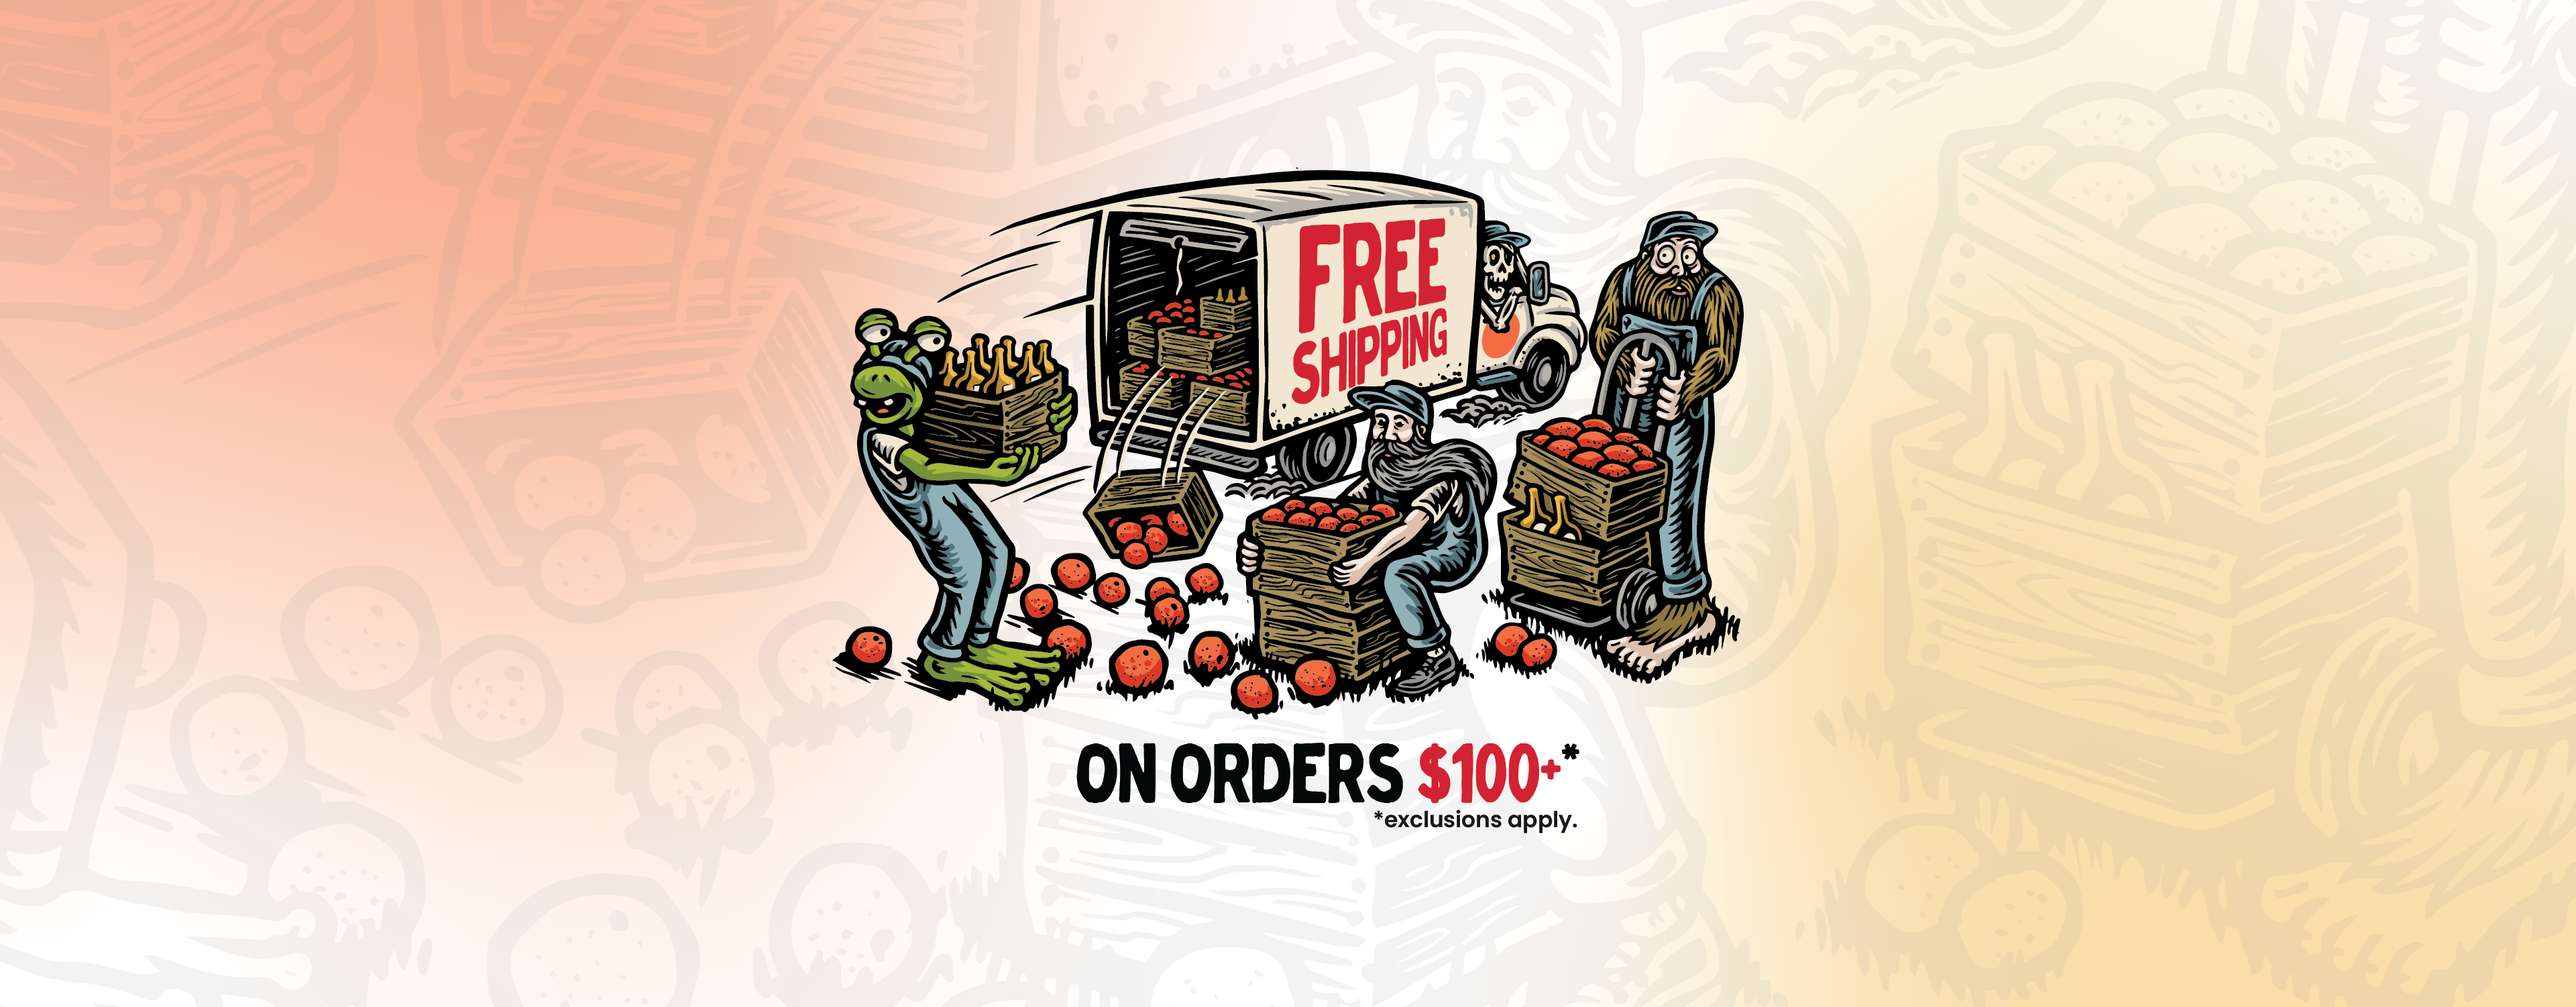 Get Free Shipping on your next order!